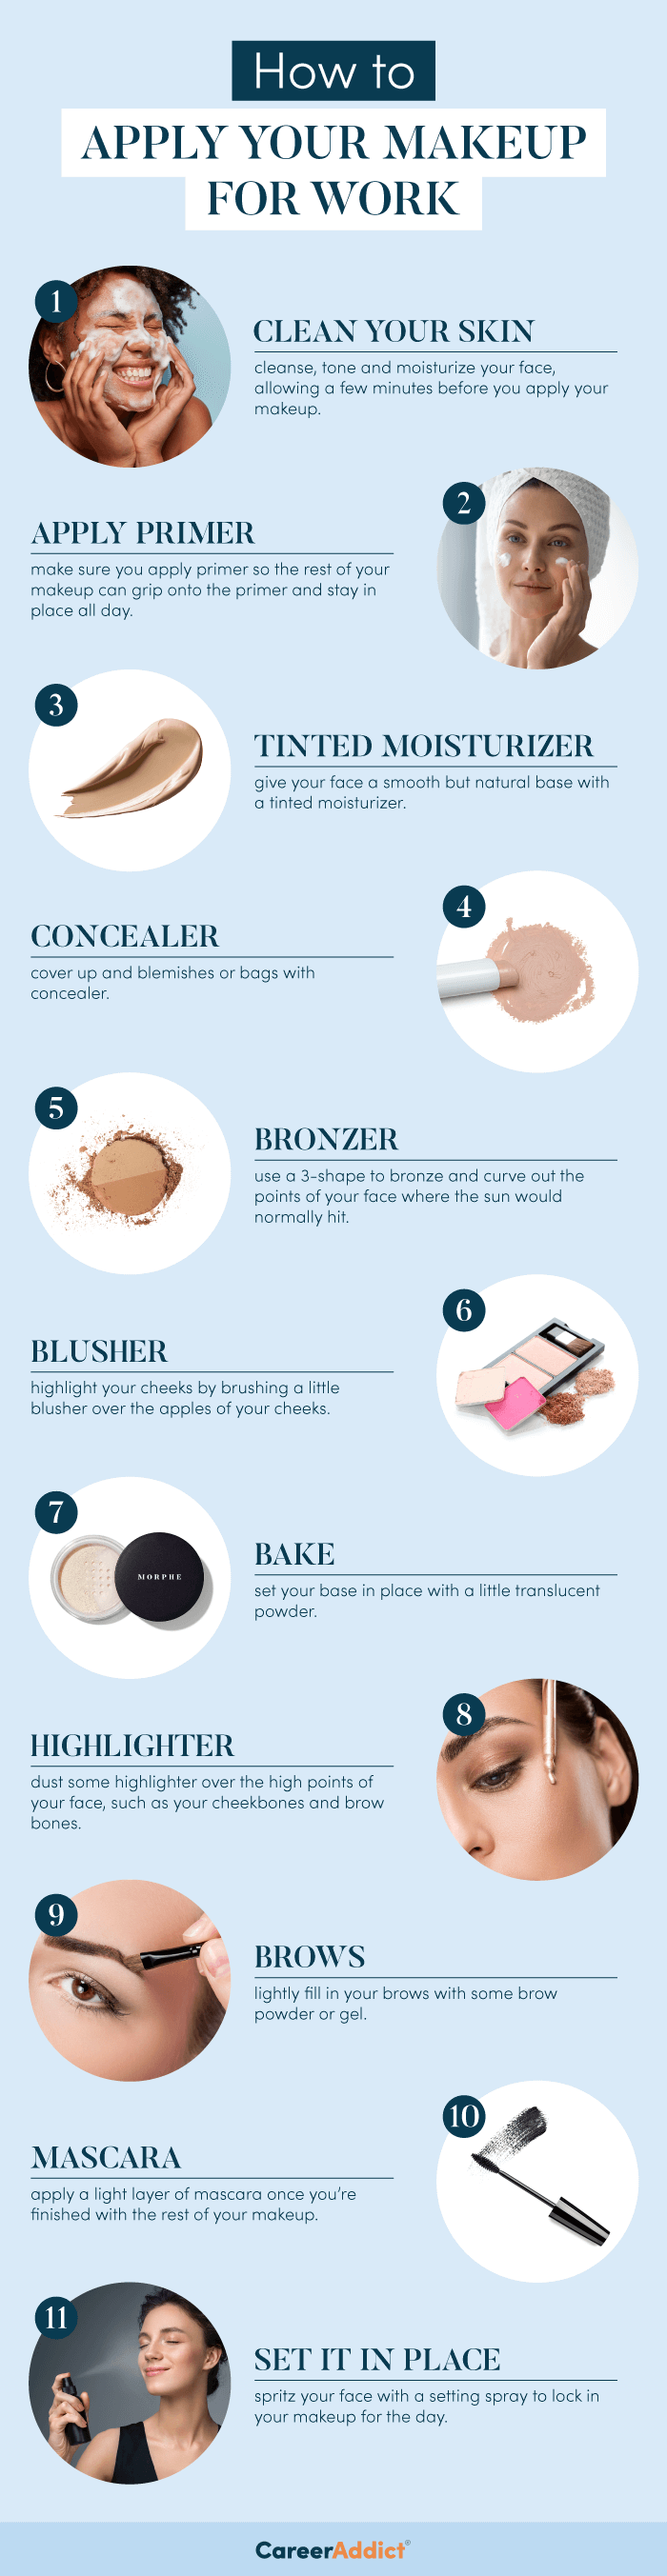 What makeup and coverage should you use after in-office procedures?